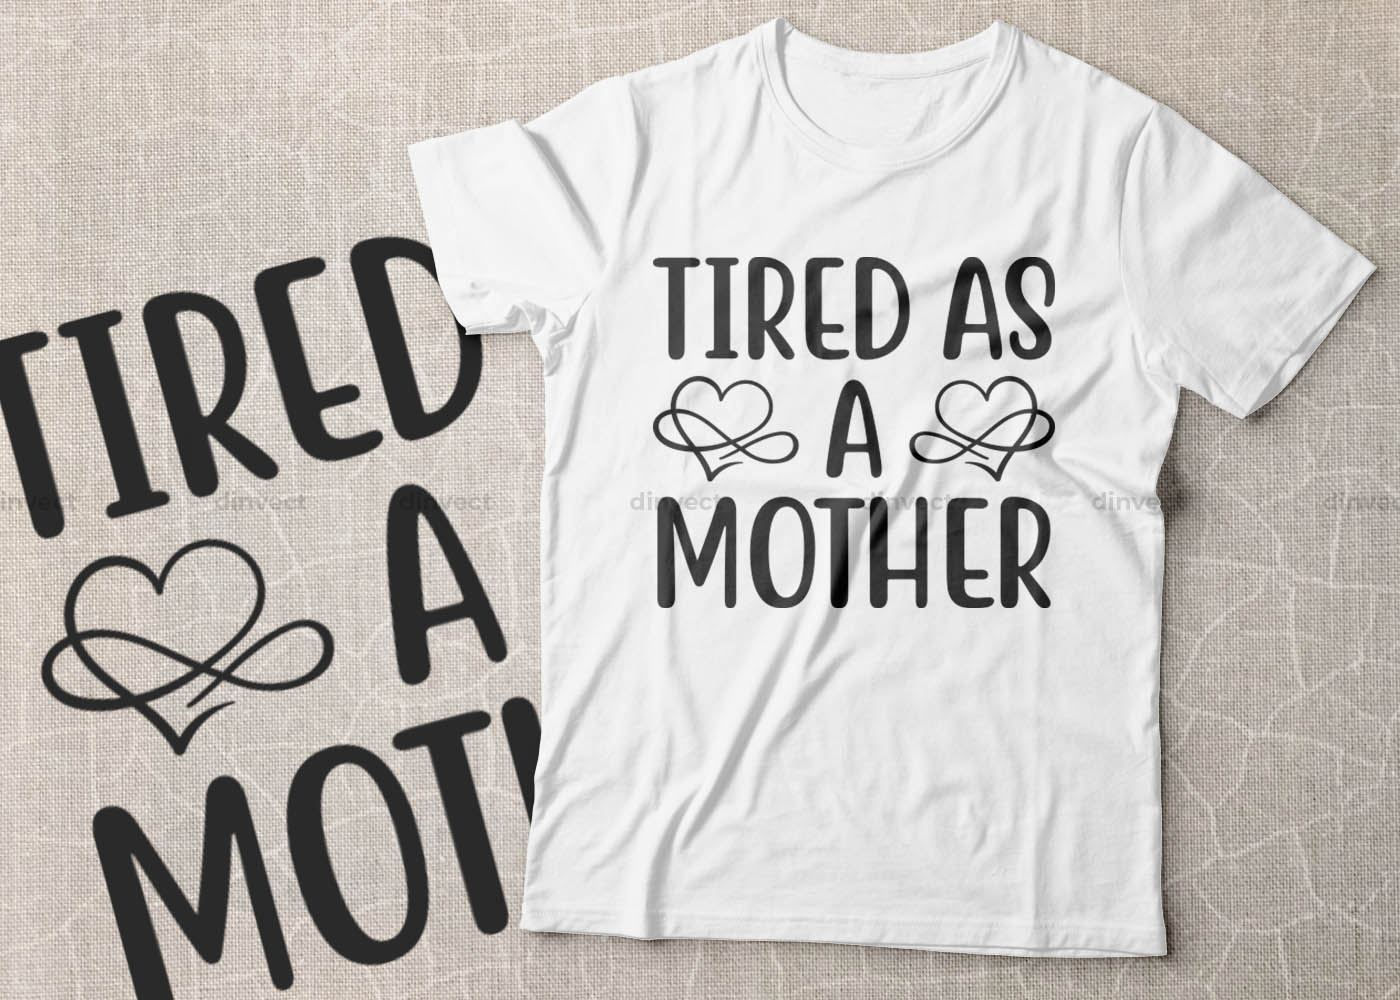 Download Tired As A Mother Svg Mom Svg Mothers Day T Shirt Design Happy Mothers Day Svg Mother S Day Cricut Files Mom Gift Cameo Vinyl Designs Iron On Decals Cricut Cut Files Svg Eps